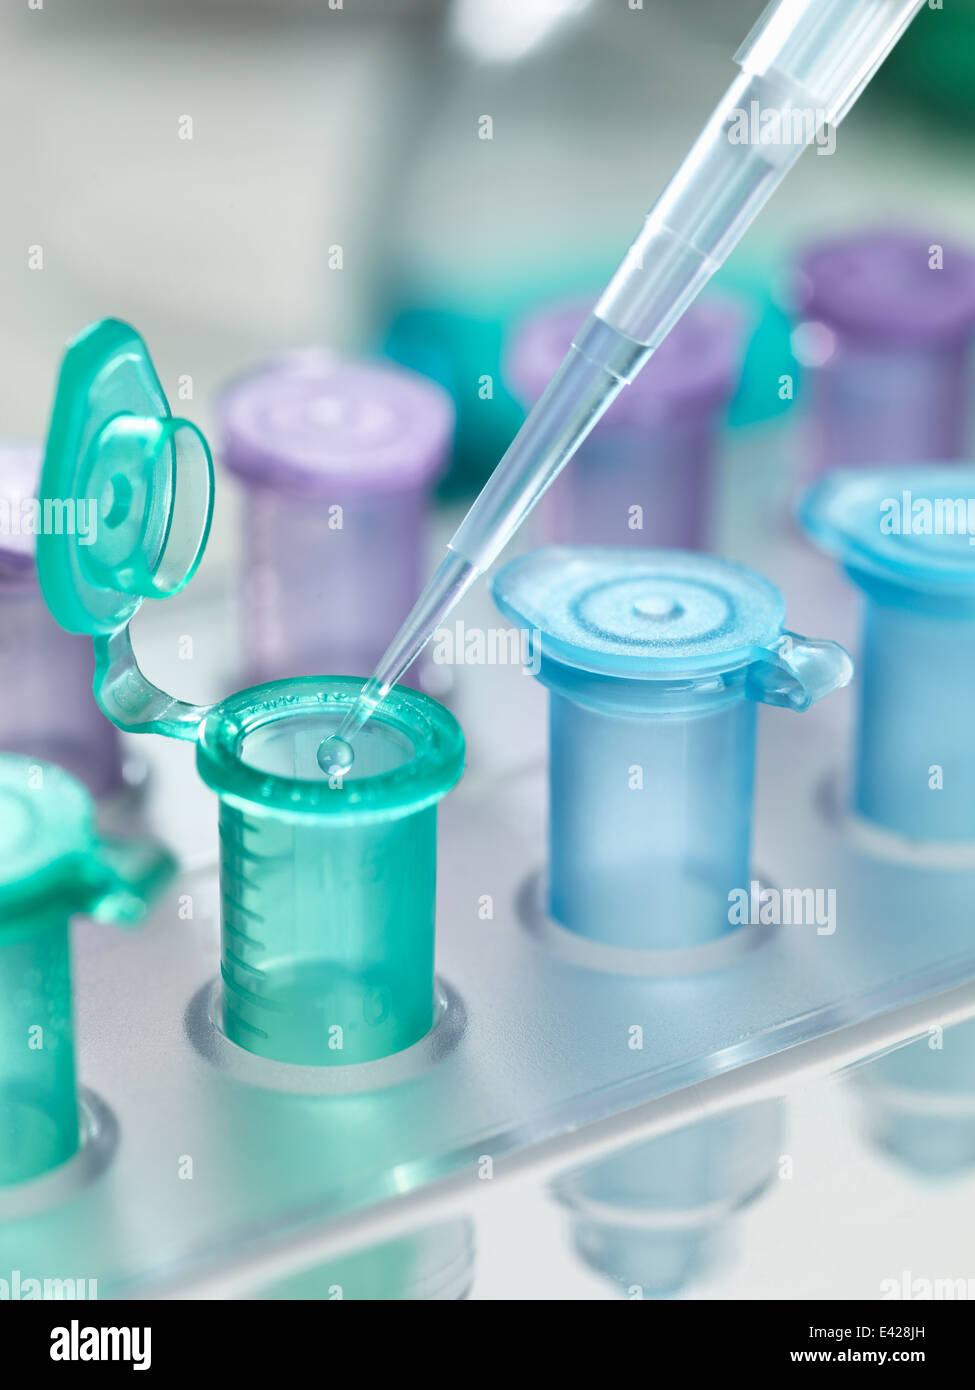 Pipette dropping a solution into a vial, used for storing liquid during chemical or biological research Stock Photo